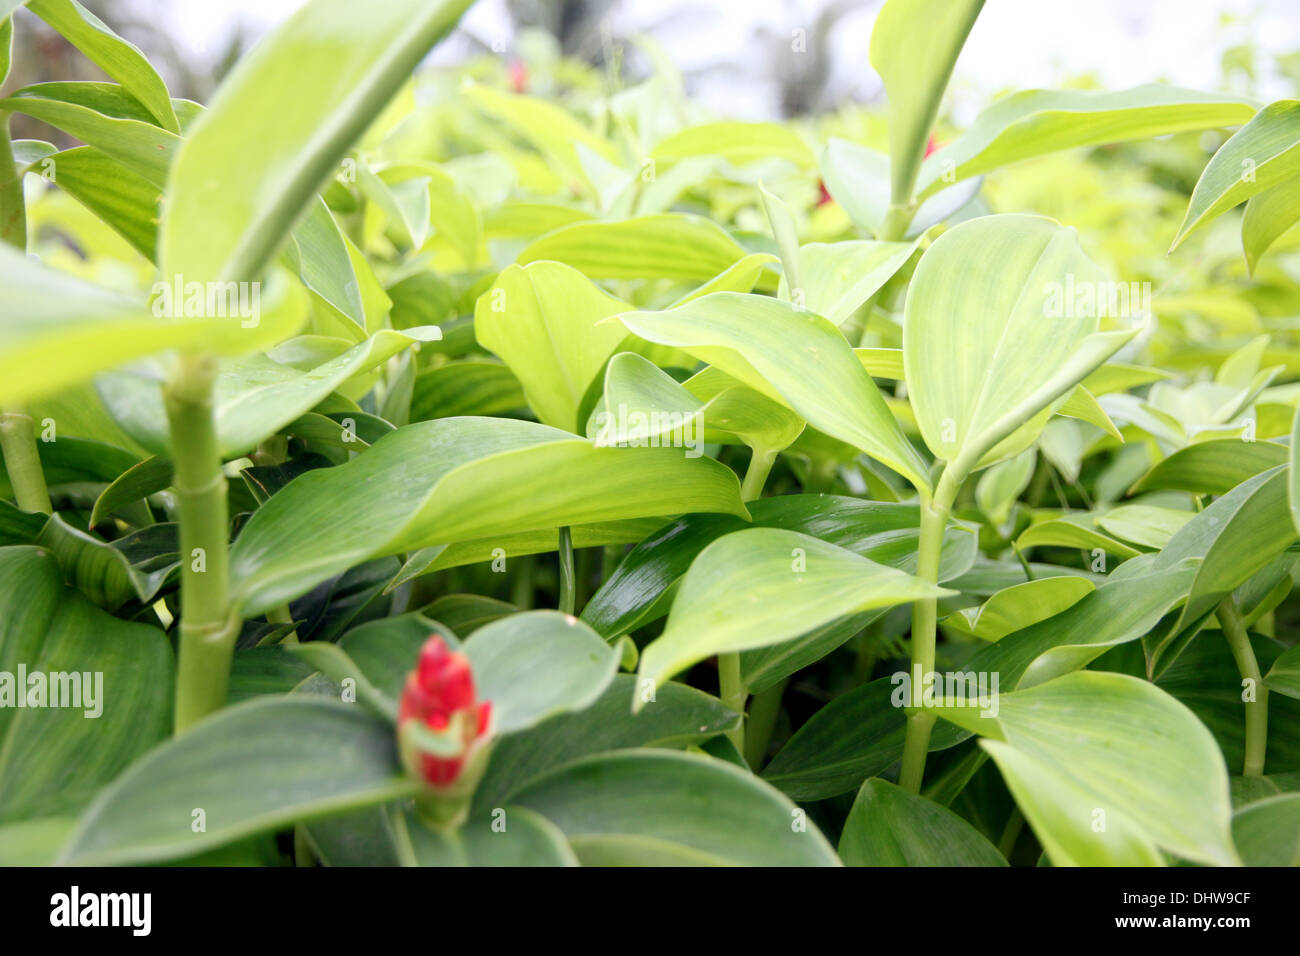 The View below Green leaf in the garden. it can be make background picture. Stock Photo